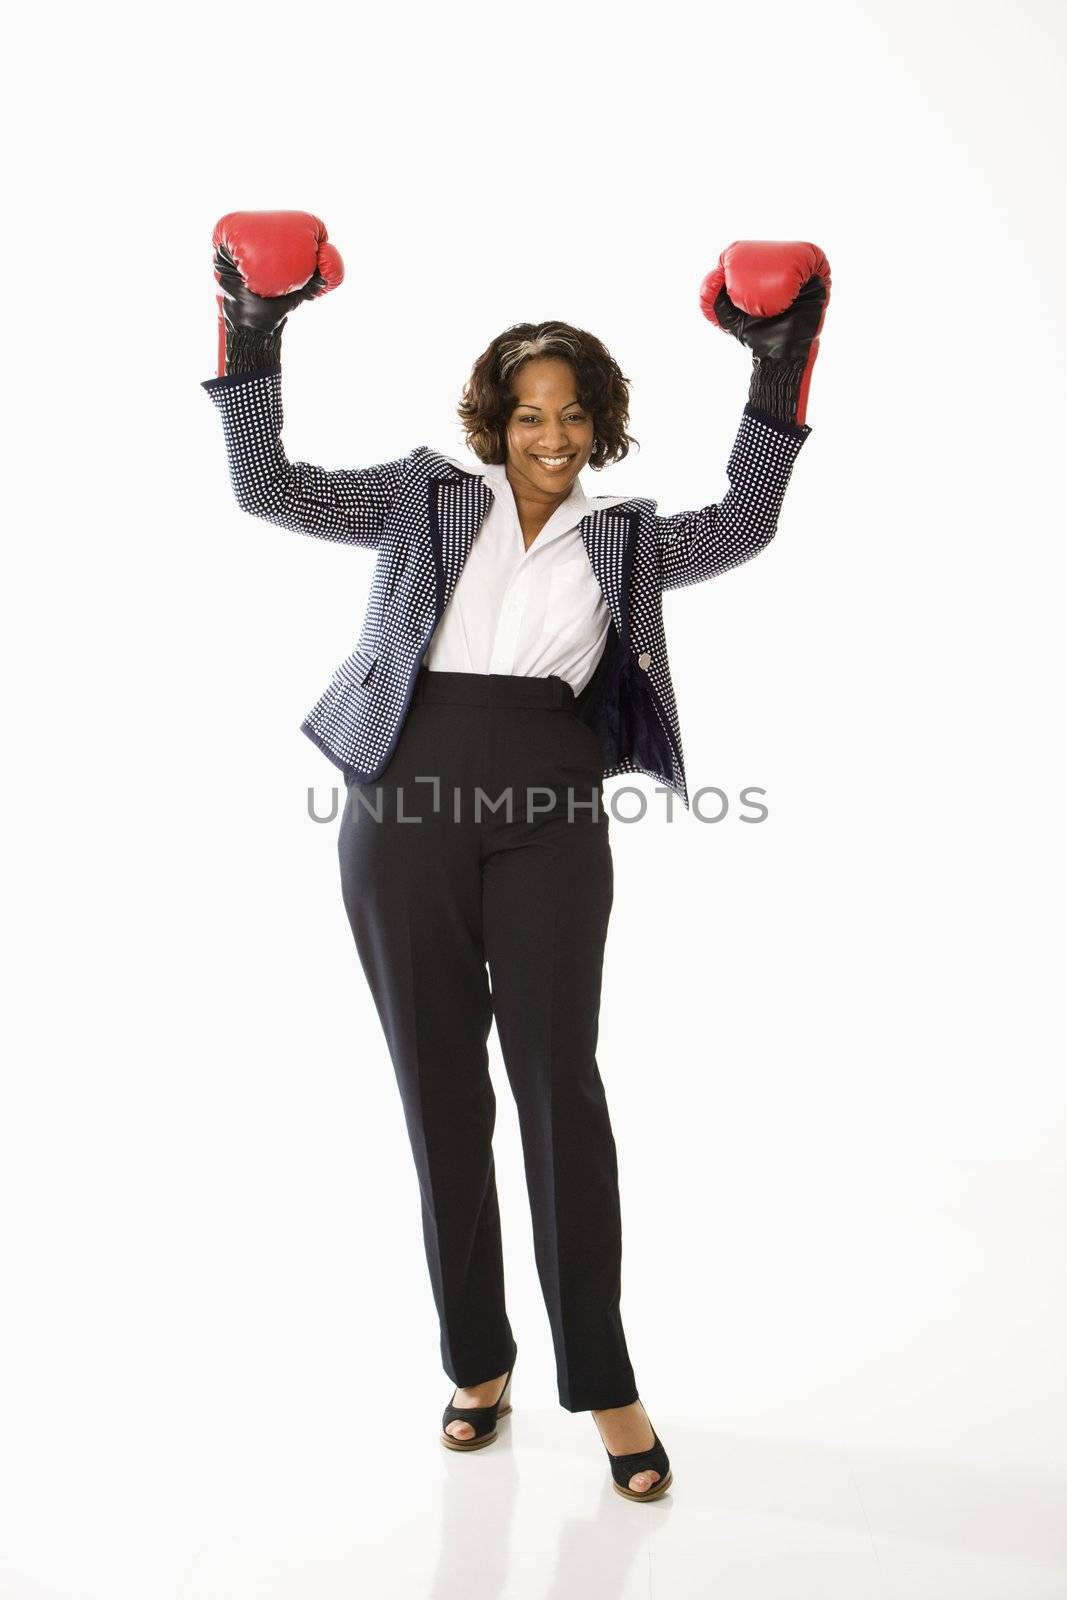 Businesswoman wearing boxing gloves holding arms up in victory stance and smiling.